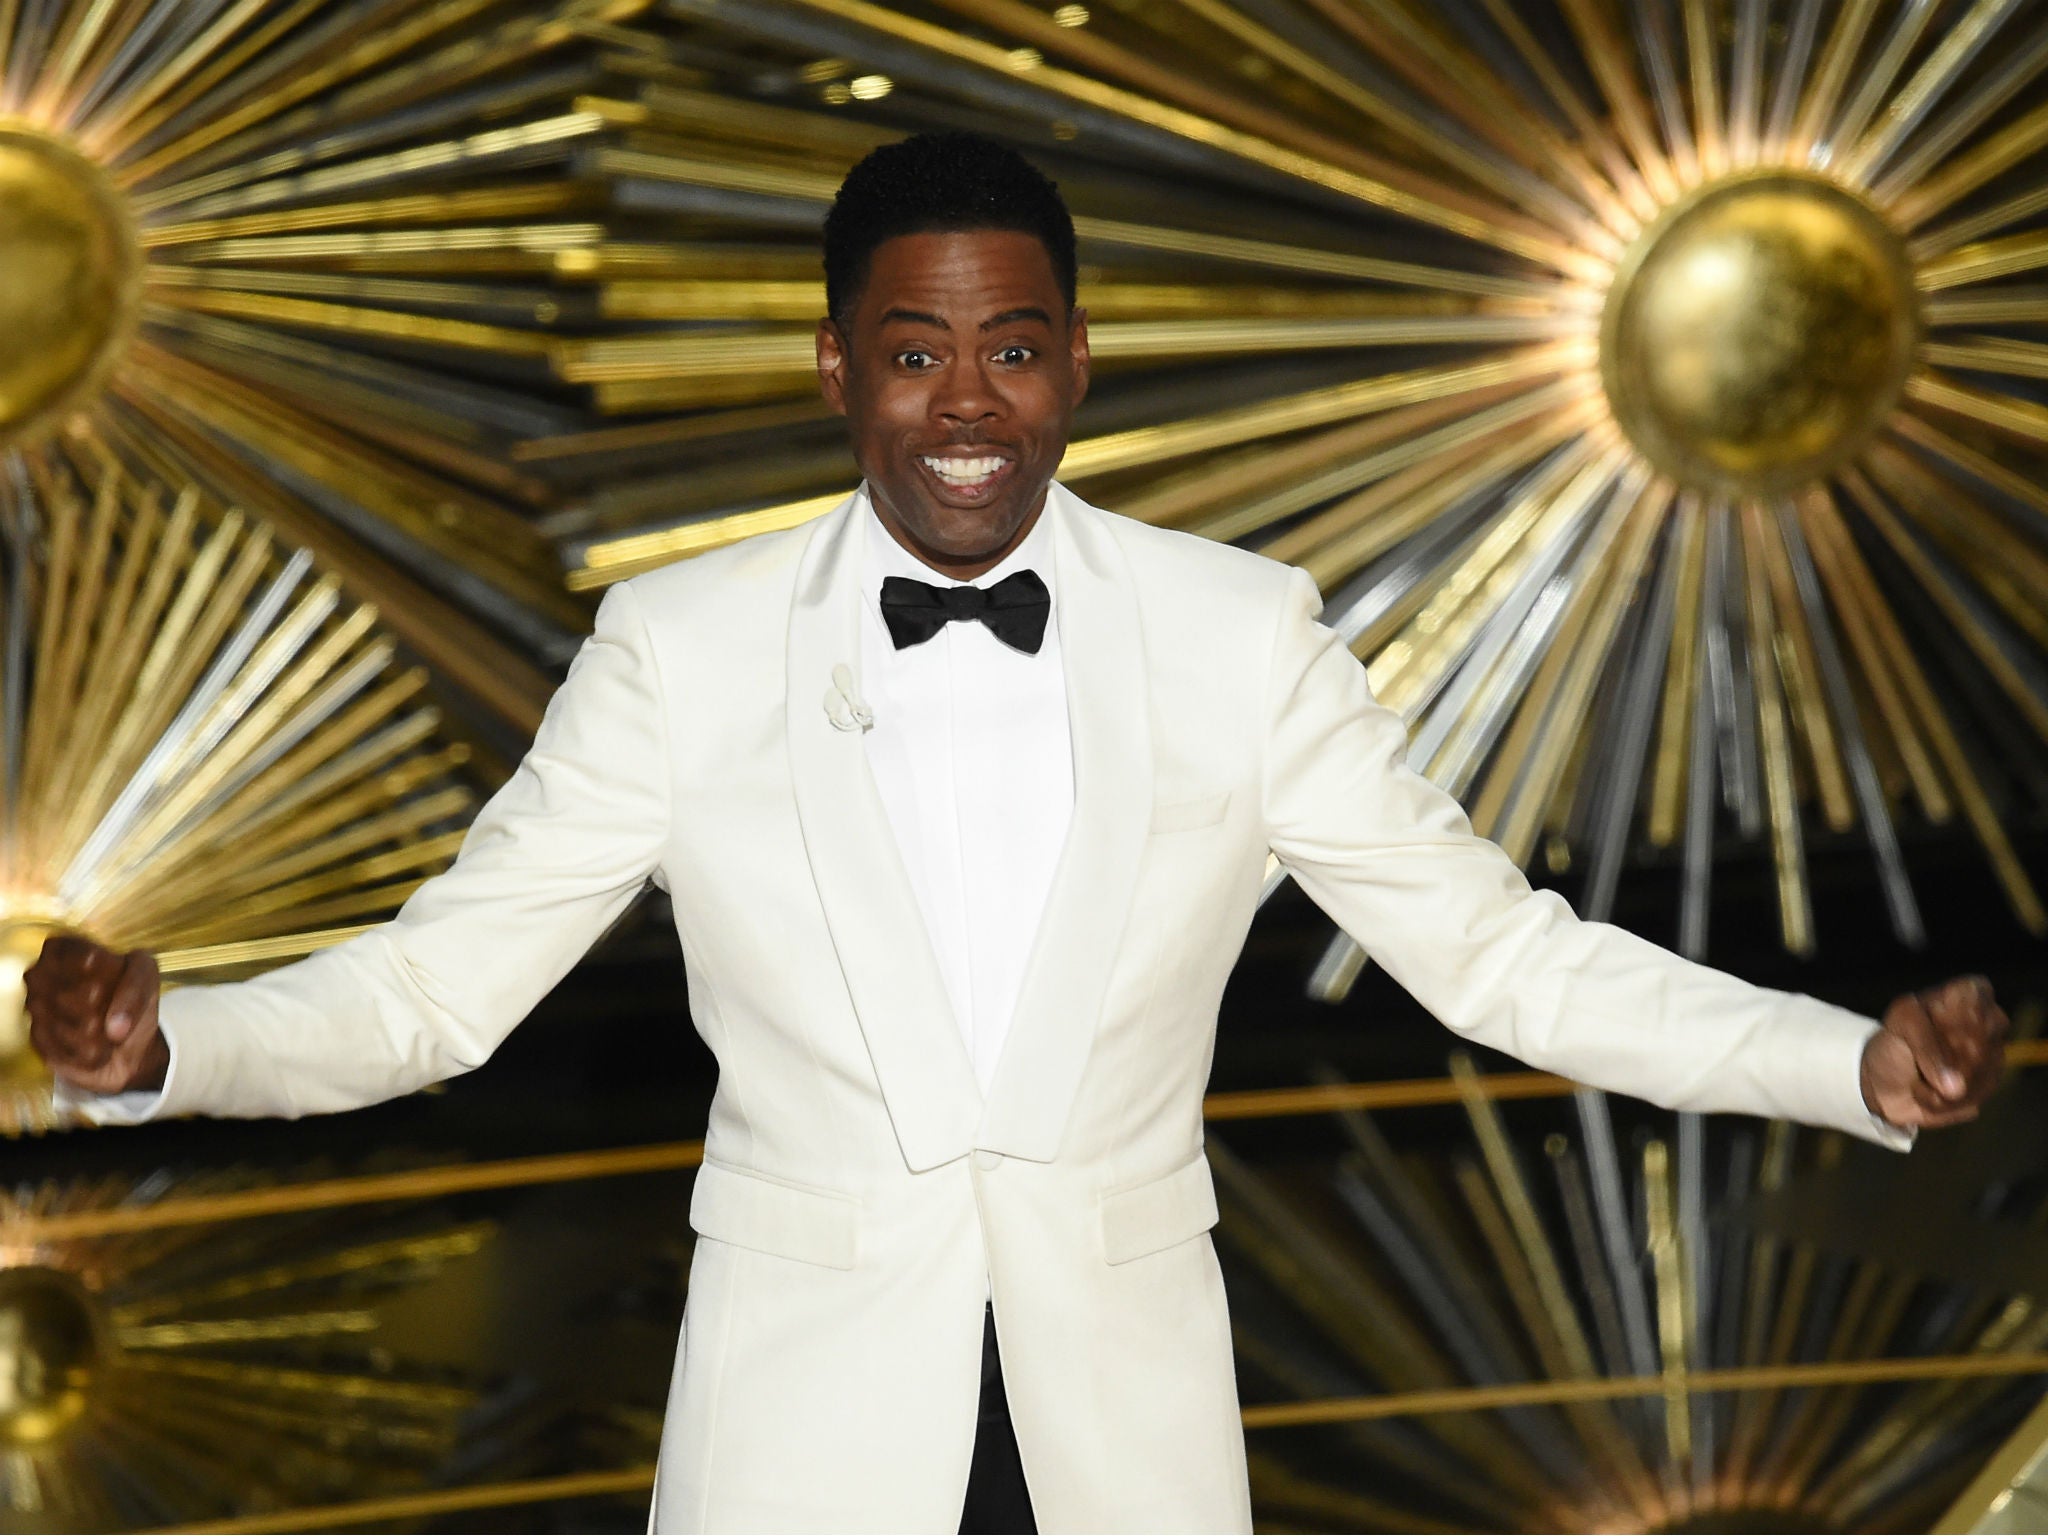 Chris Rock unashamedly used his hosting slot to go heavy on the OscarsSoWhite gags